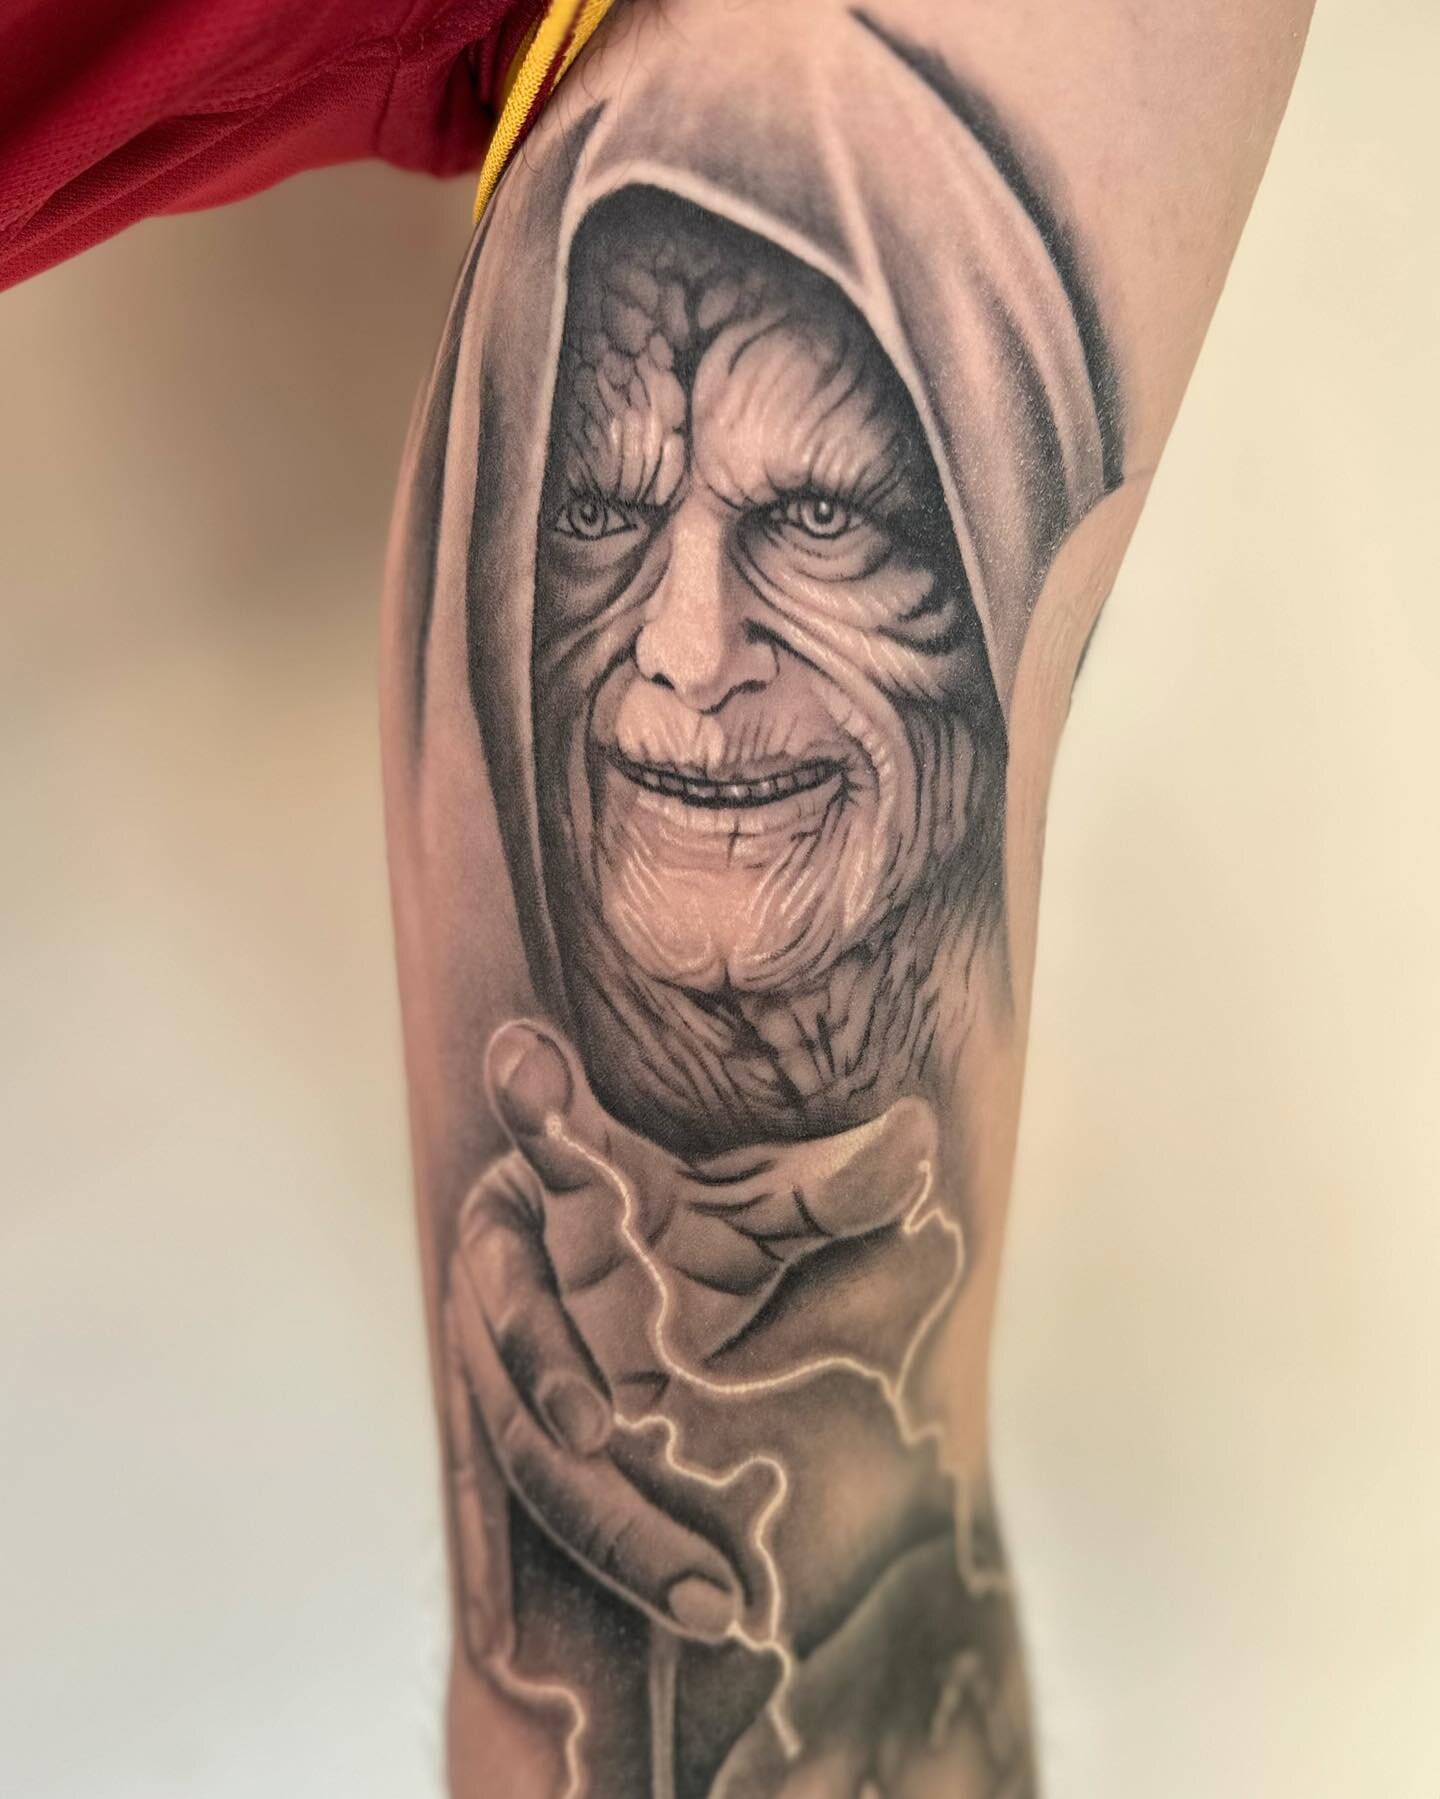 A healed shot of Darth Sidious on Callum. Made in one day session a few weeks ago, a really fun one to tattoo ✨
.
.
.
.
.
#darthsidious #emperorpalpatine #starwars #starwarstattoo #tattoos #blackandgreytattoo #tattooed #manchestertattoo #realistictat